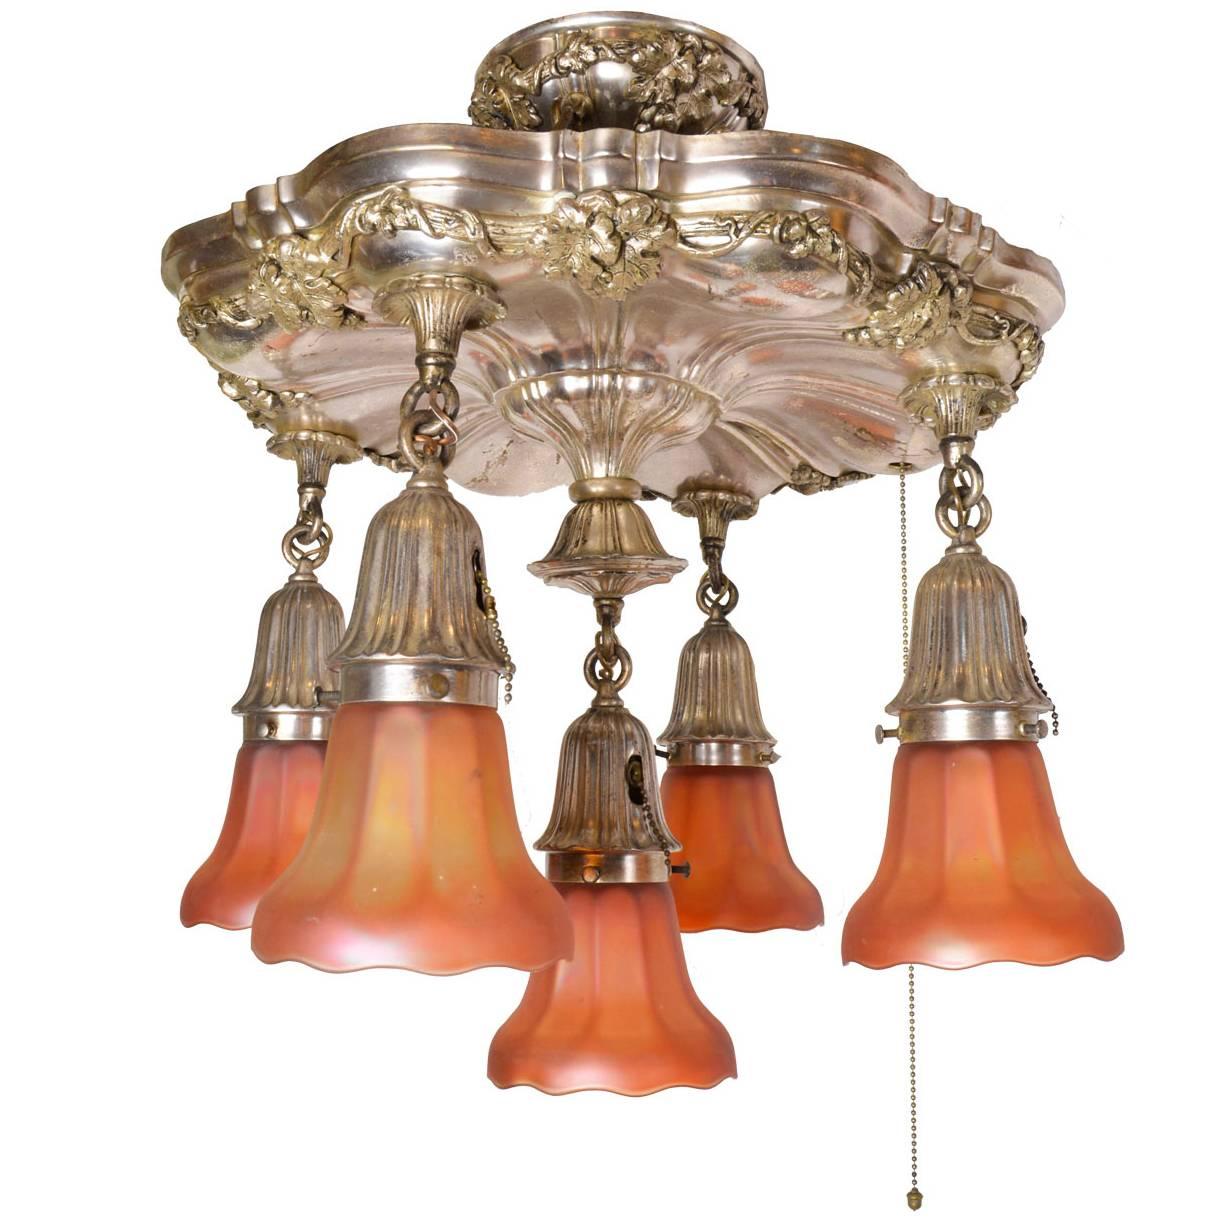 Stunning Silver Plated Five-Light Chandelier with Carnival Glass Shades